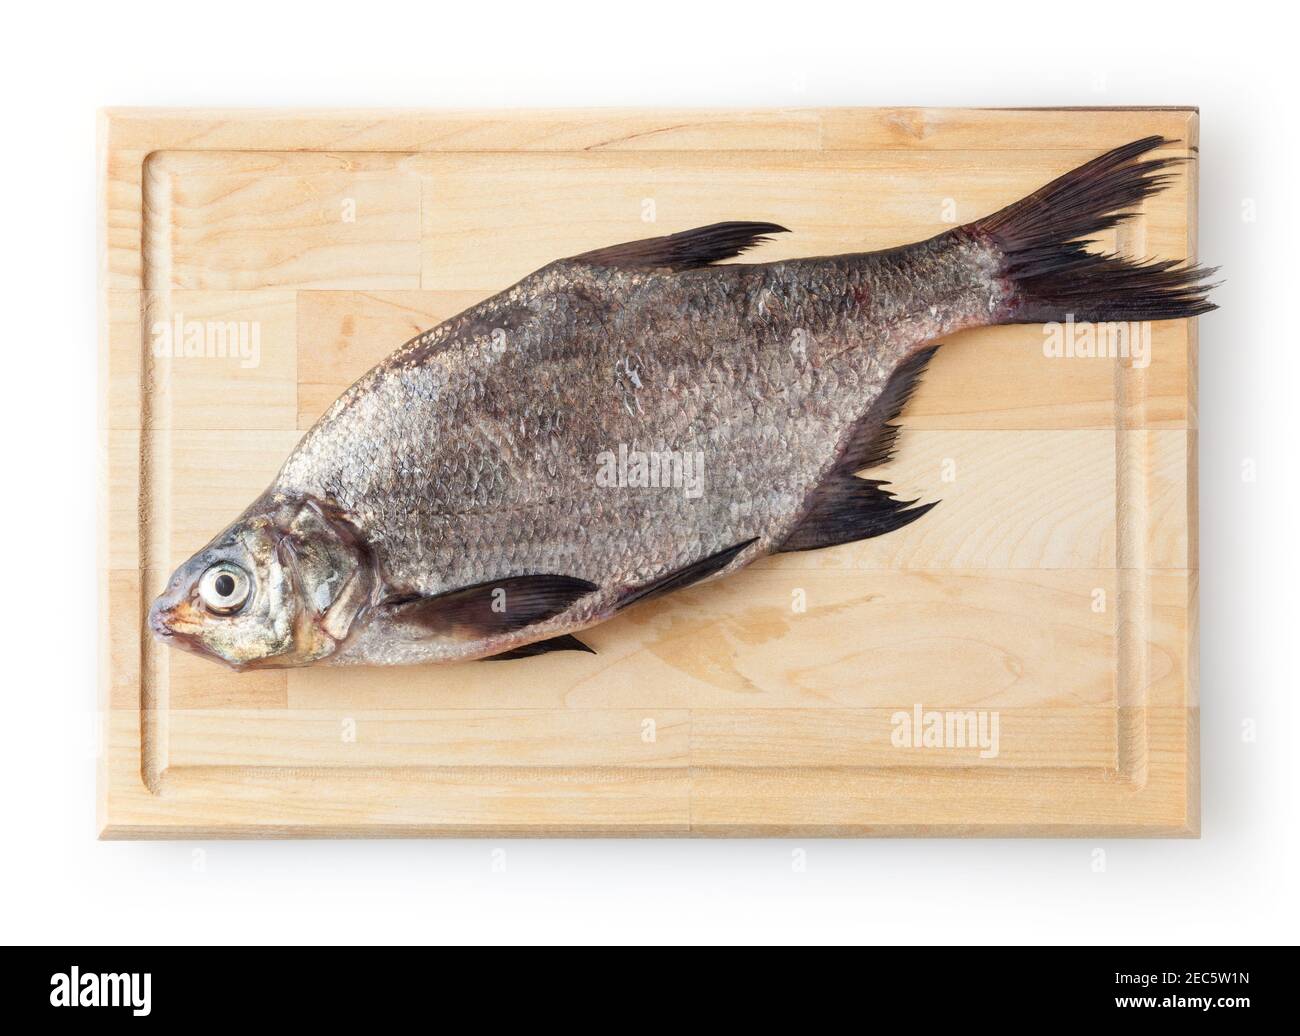 Common river bream on cutting board isolated on white background. Freshwater fish Stock Photo